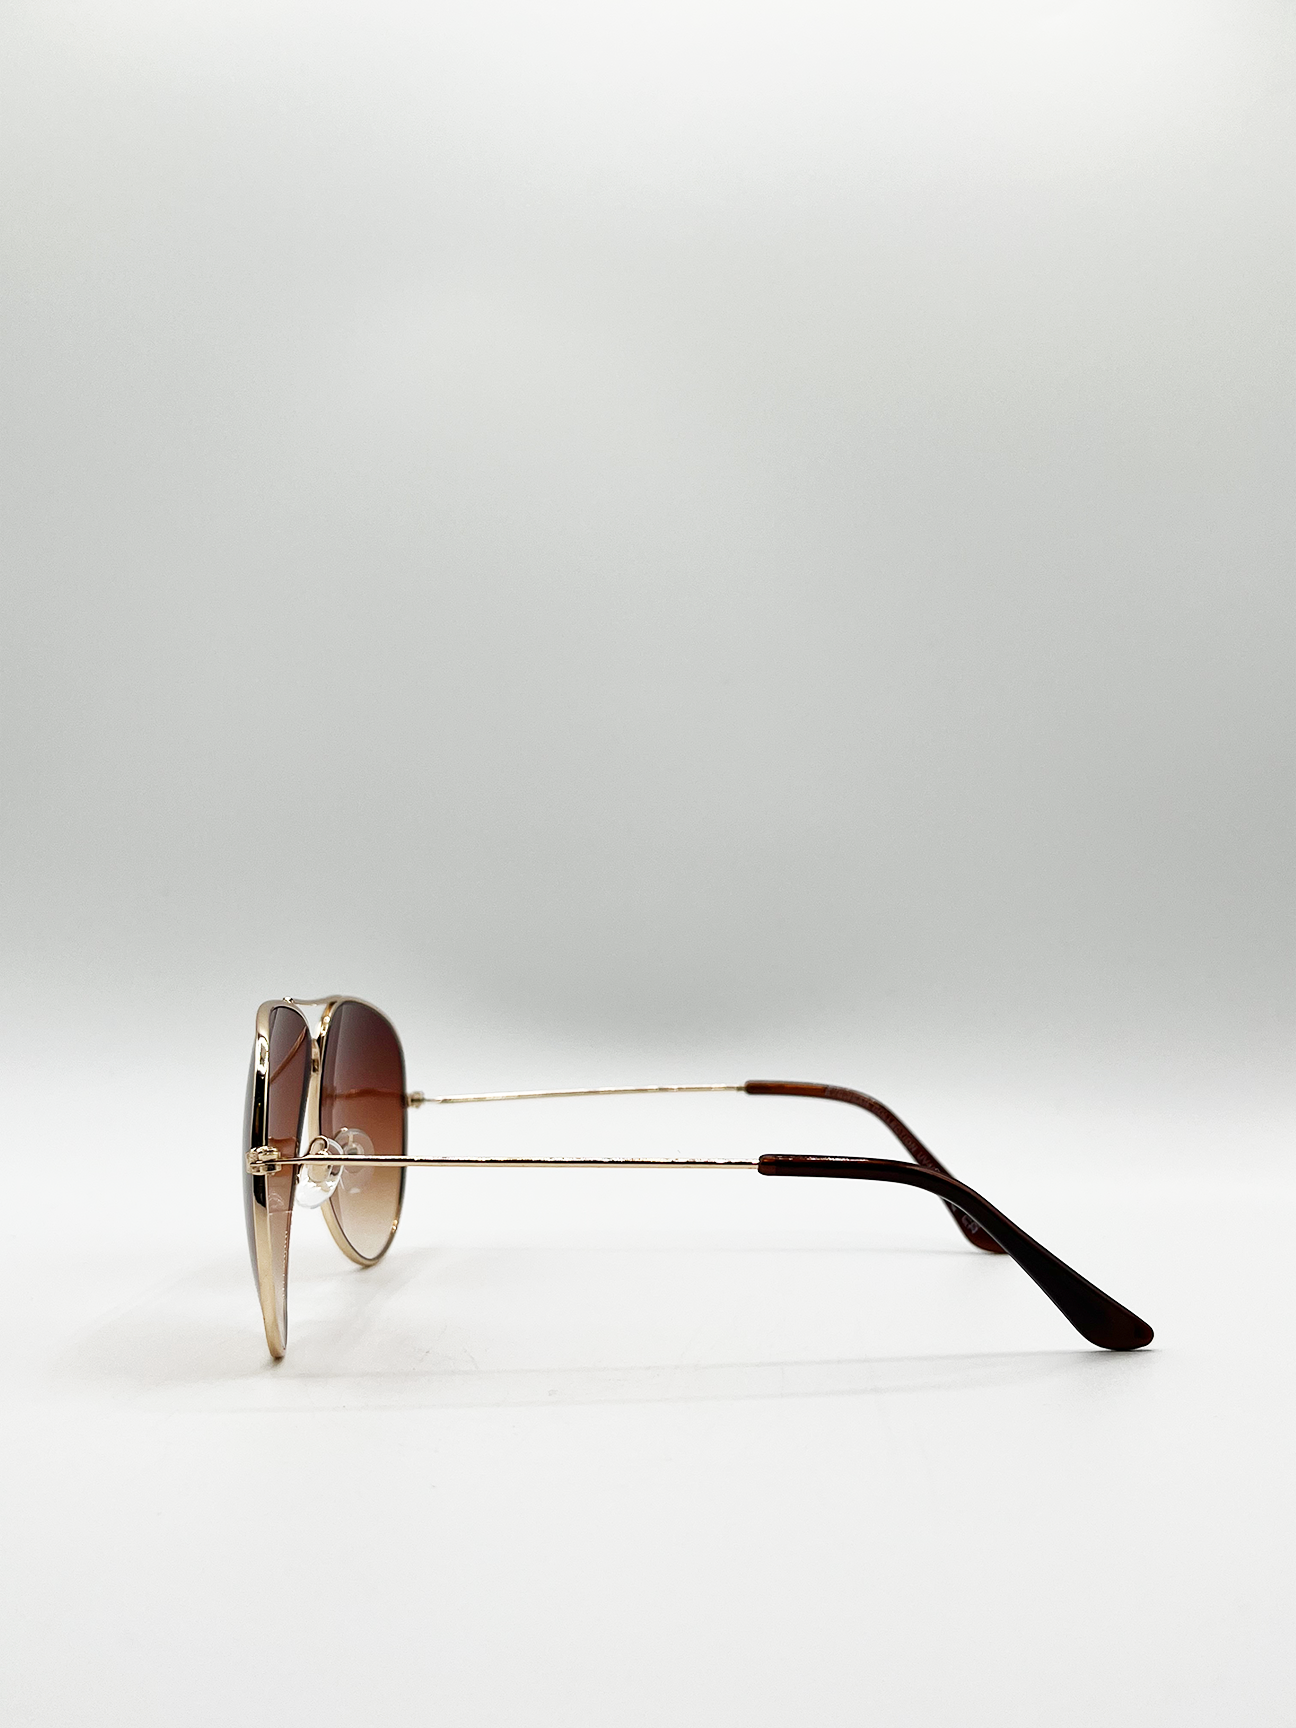 Gold Aviator Sunglasses with Brown Lenses